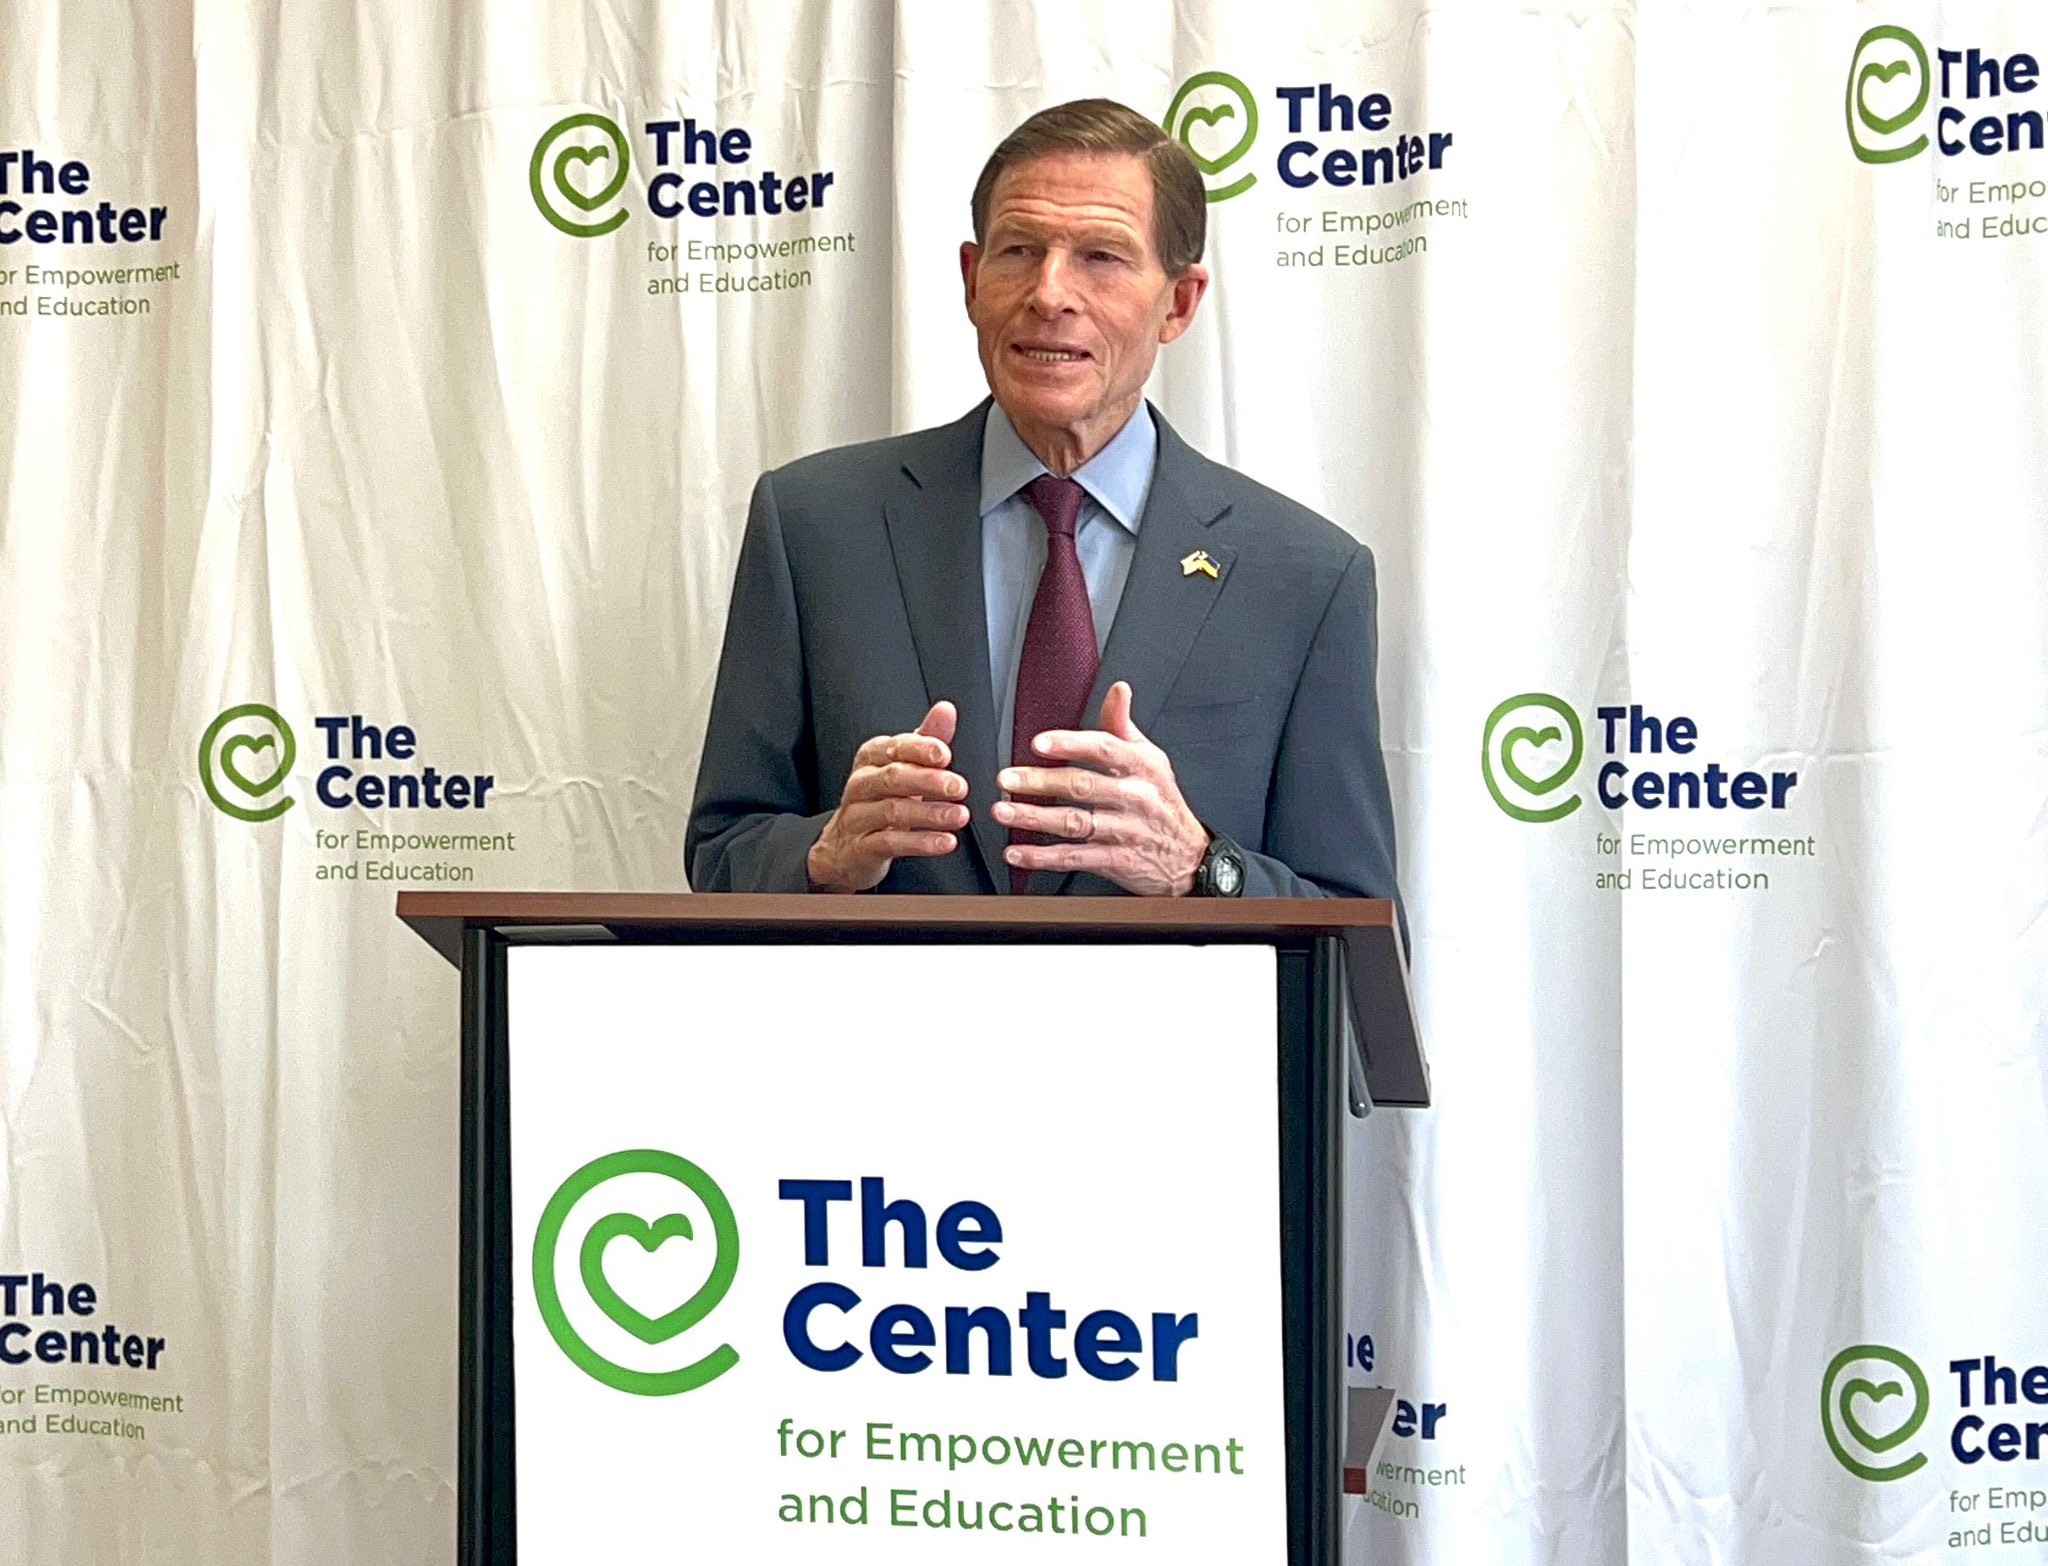 Blumenthal joined The Center for Empowerment and Education to call on the Federal Communications Commission (FCC) to adopt strong rules to help survivors of domestic violence and other crimes to cut ties with their abusers and separate from shared wireless service plans, which can be exploited to monitor, stalk or control victims.